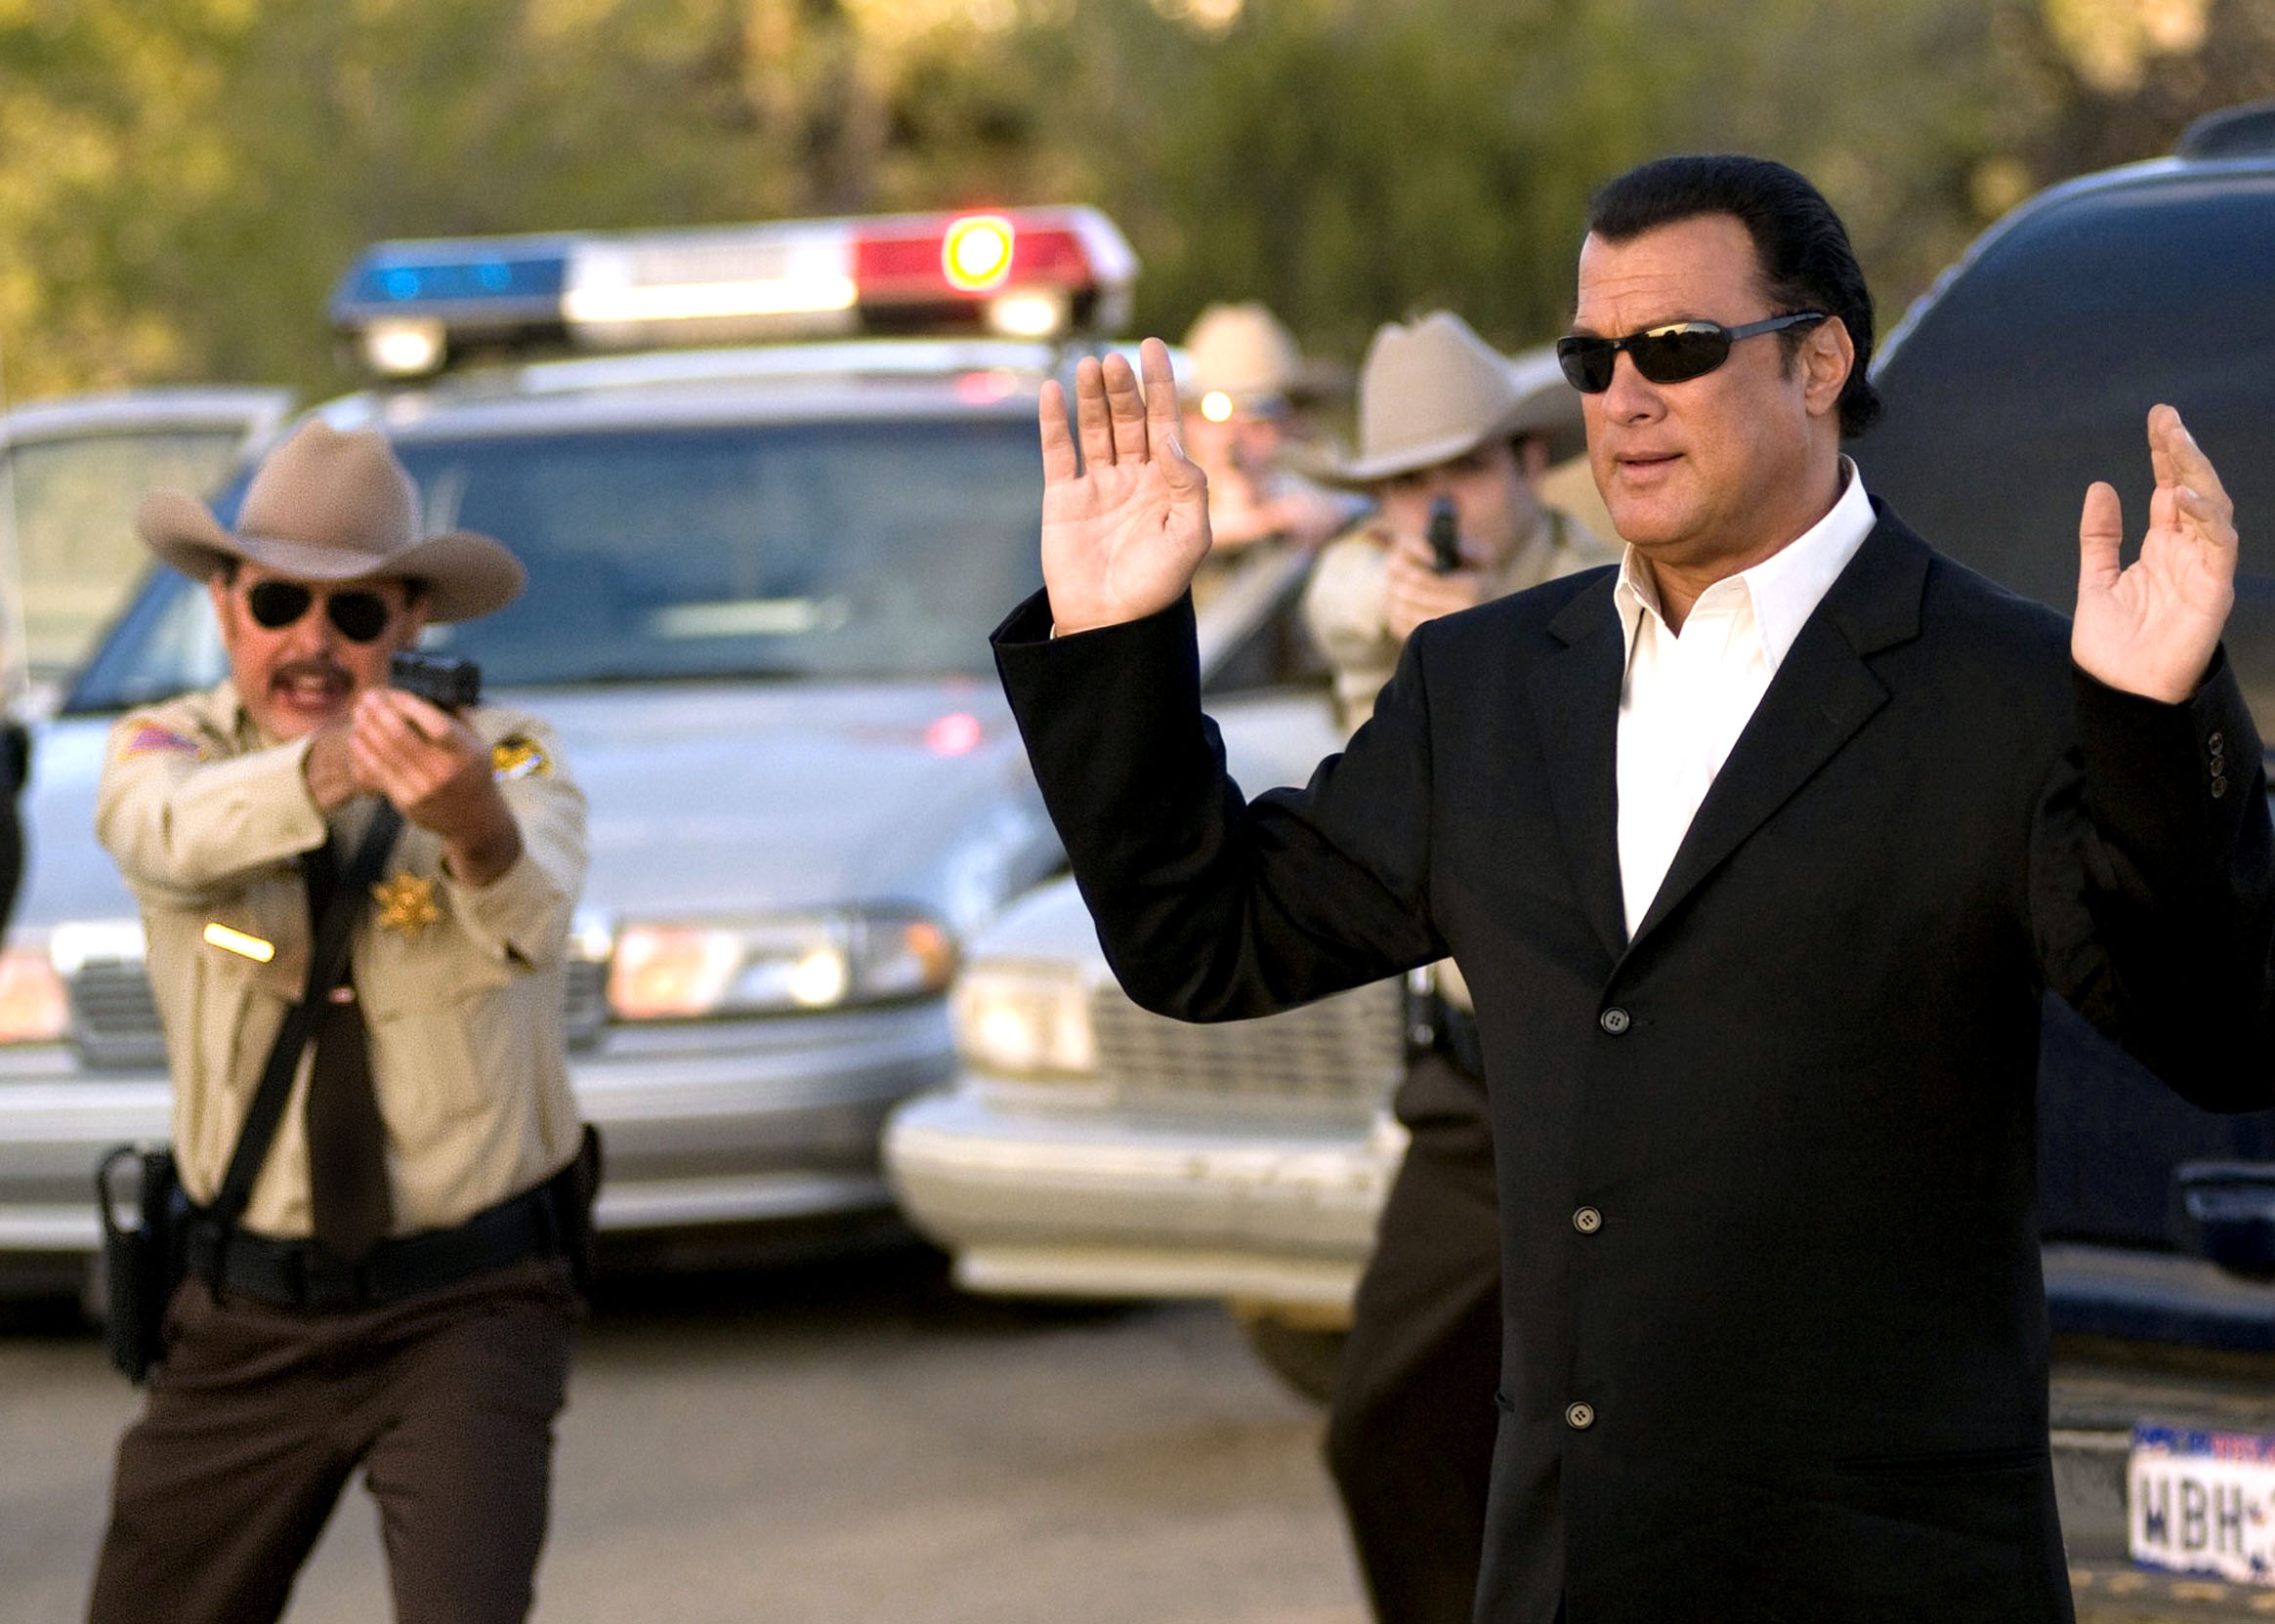 David Manzanares persuades Steven Seagal on the set of THE KEEPER, 2008